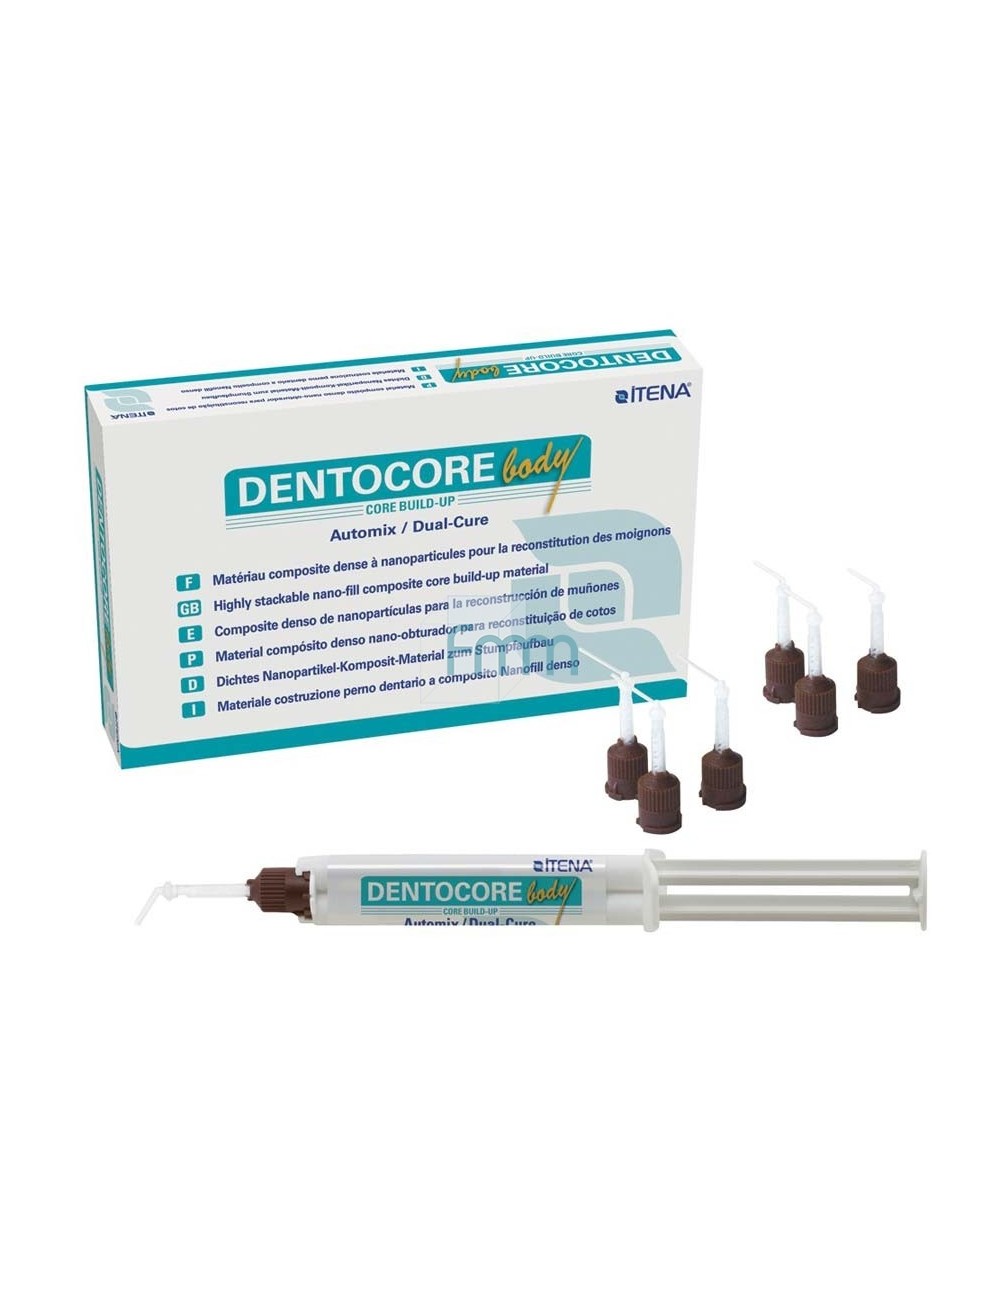 DENTOCORE BODY SERINGUE 5 ML AUTOMIX A3 + EMBOUTS